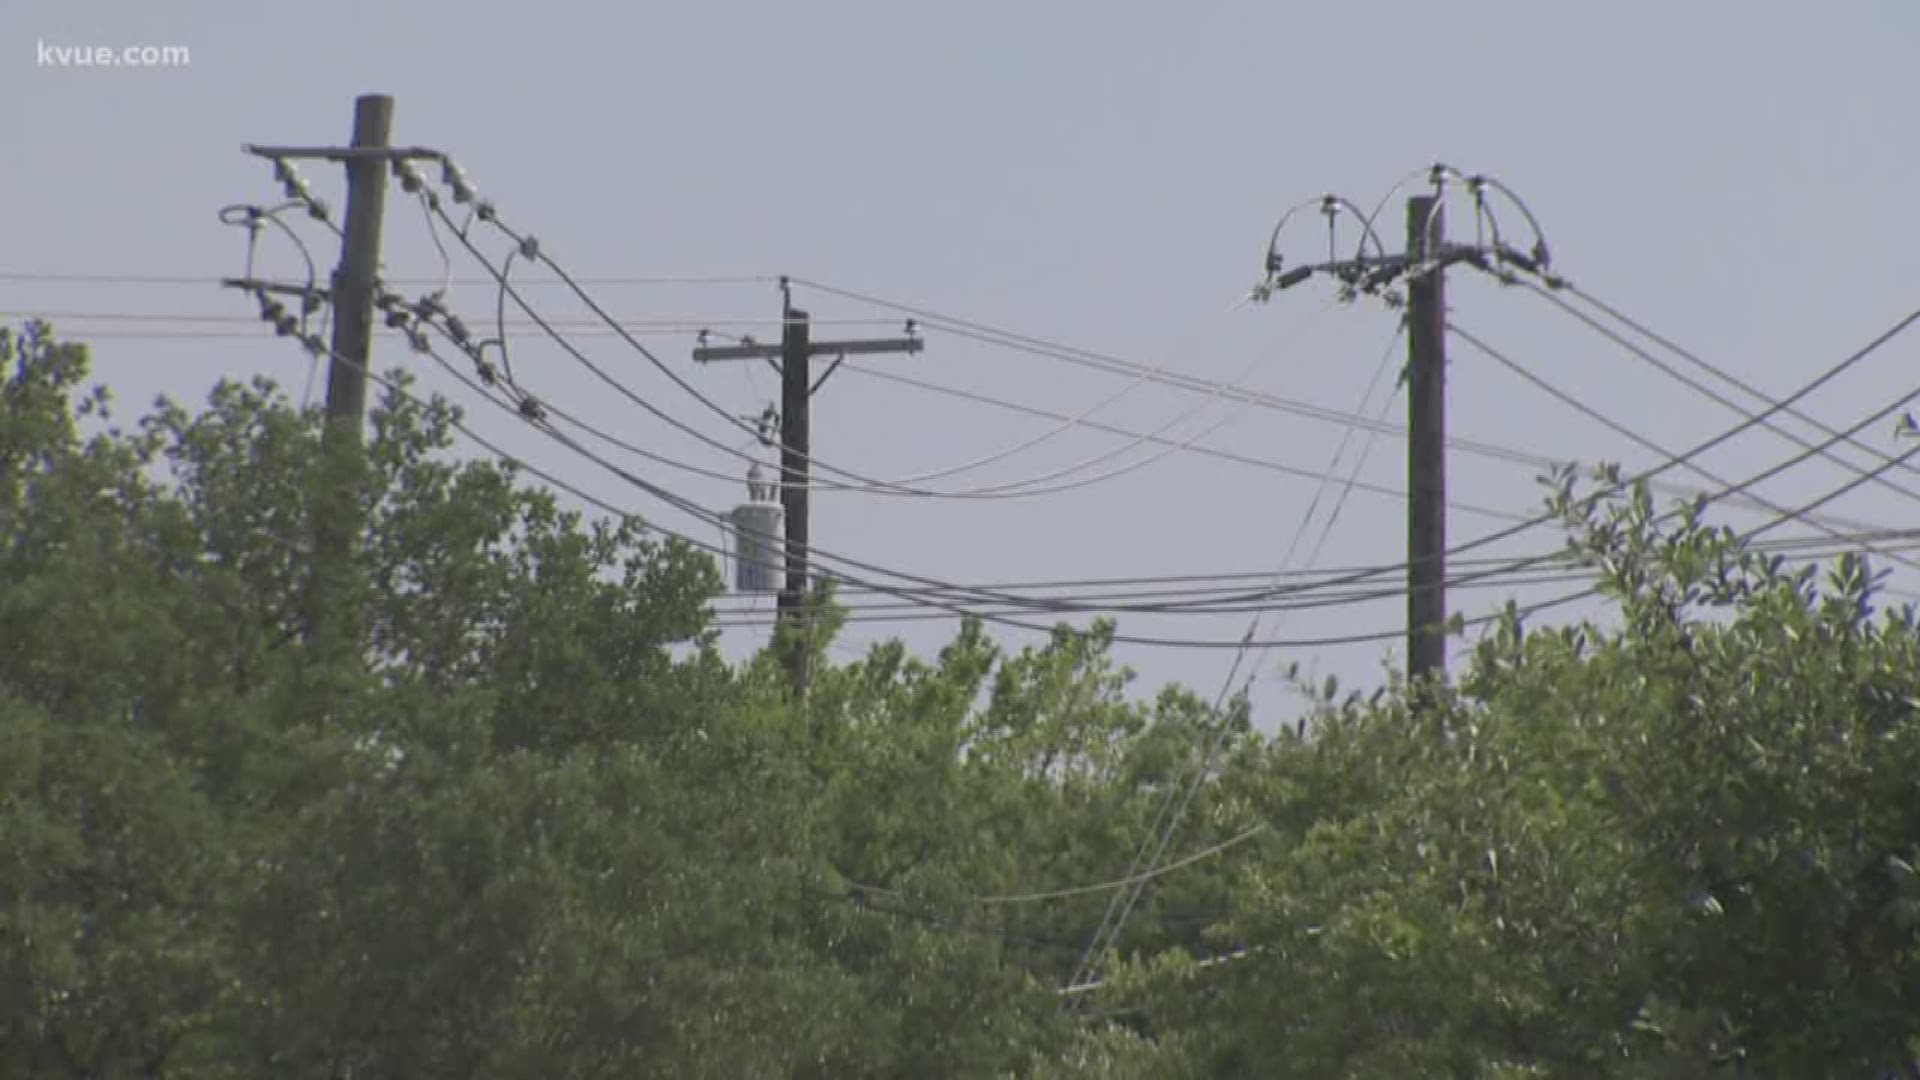 KVUE learned that during Friday night's storms, Austin/Travis County's 911 center received 13 calls for wires down.